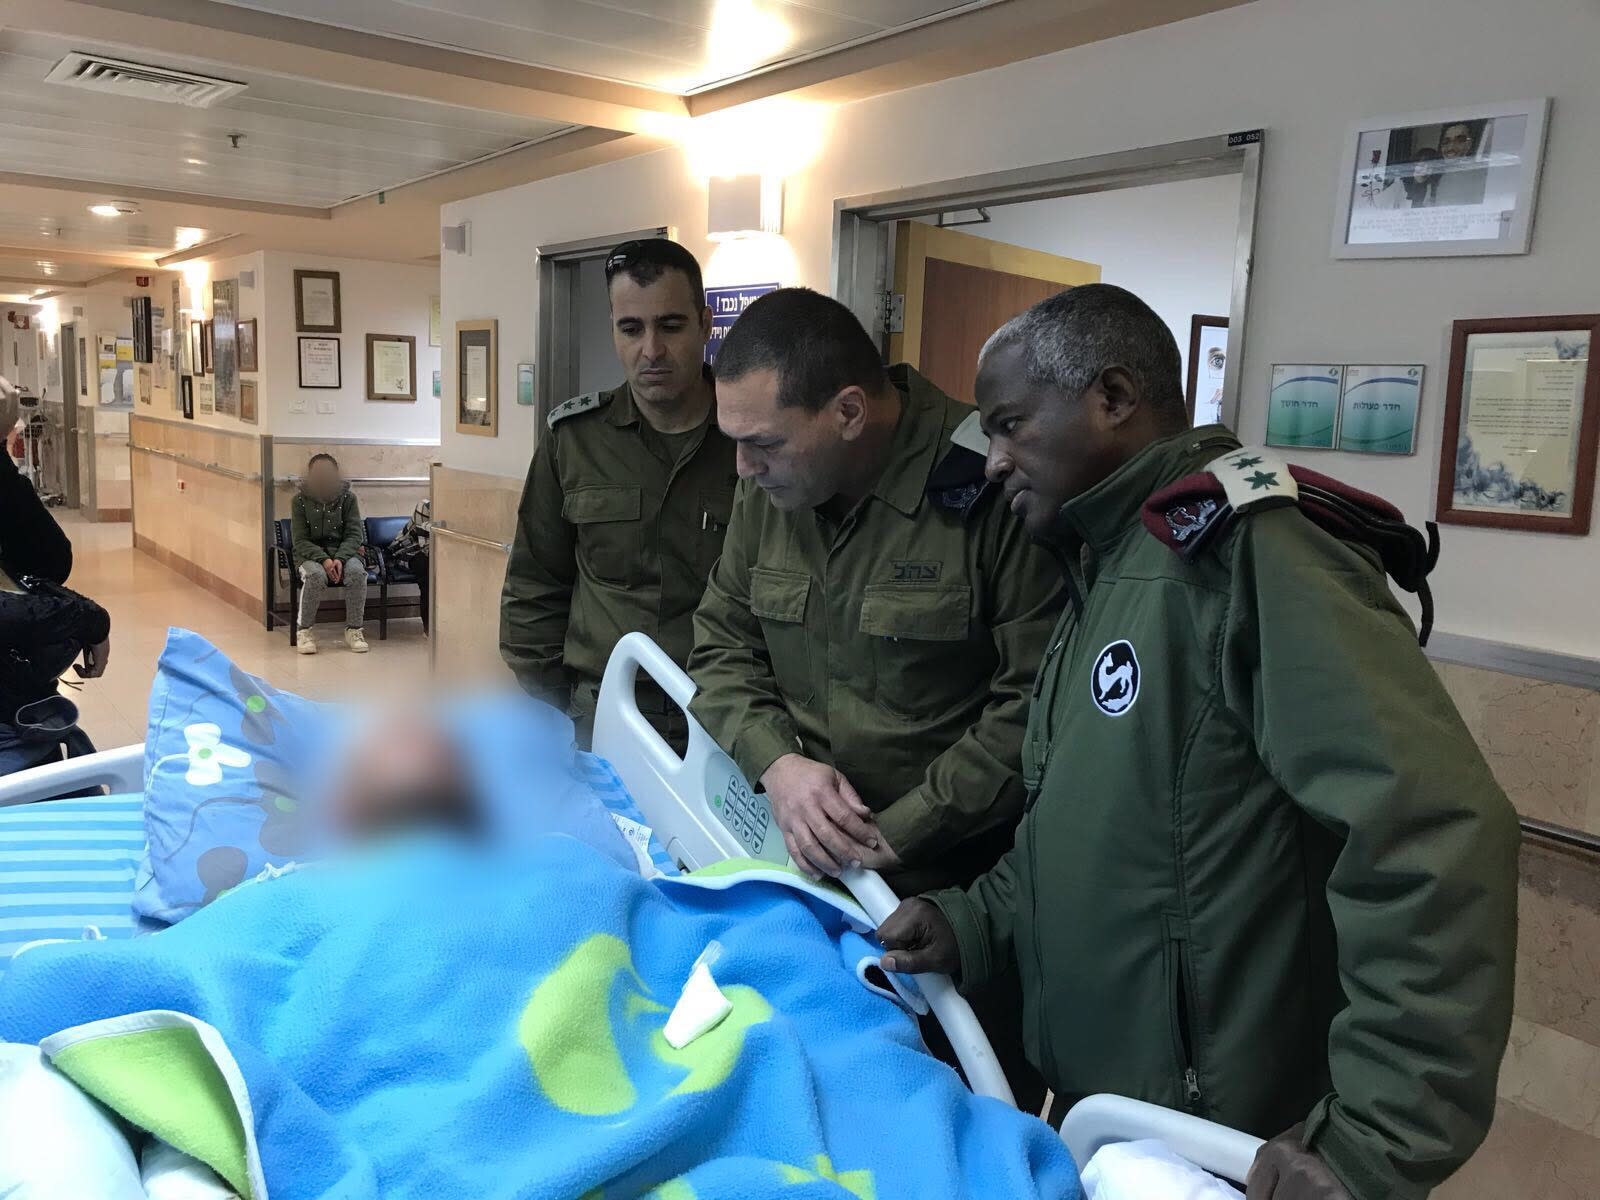 Southern Command Maj.-Gen. Eyal Zamir with one of the soldiers wounded on February 17, 2018 (IDF SPOKESPERSON'S UNIT)